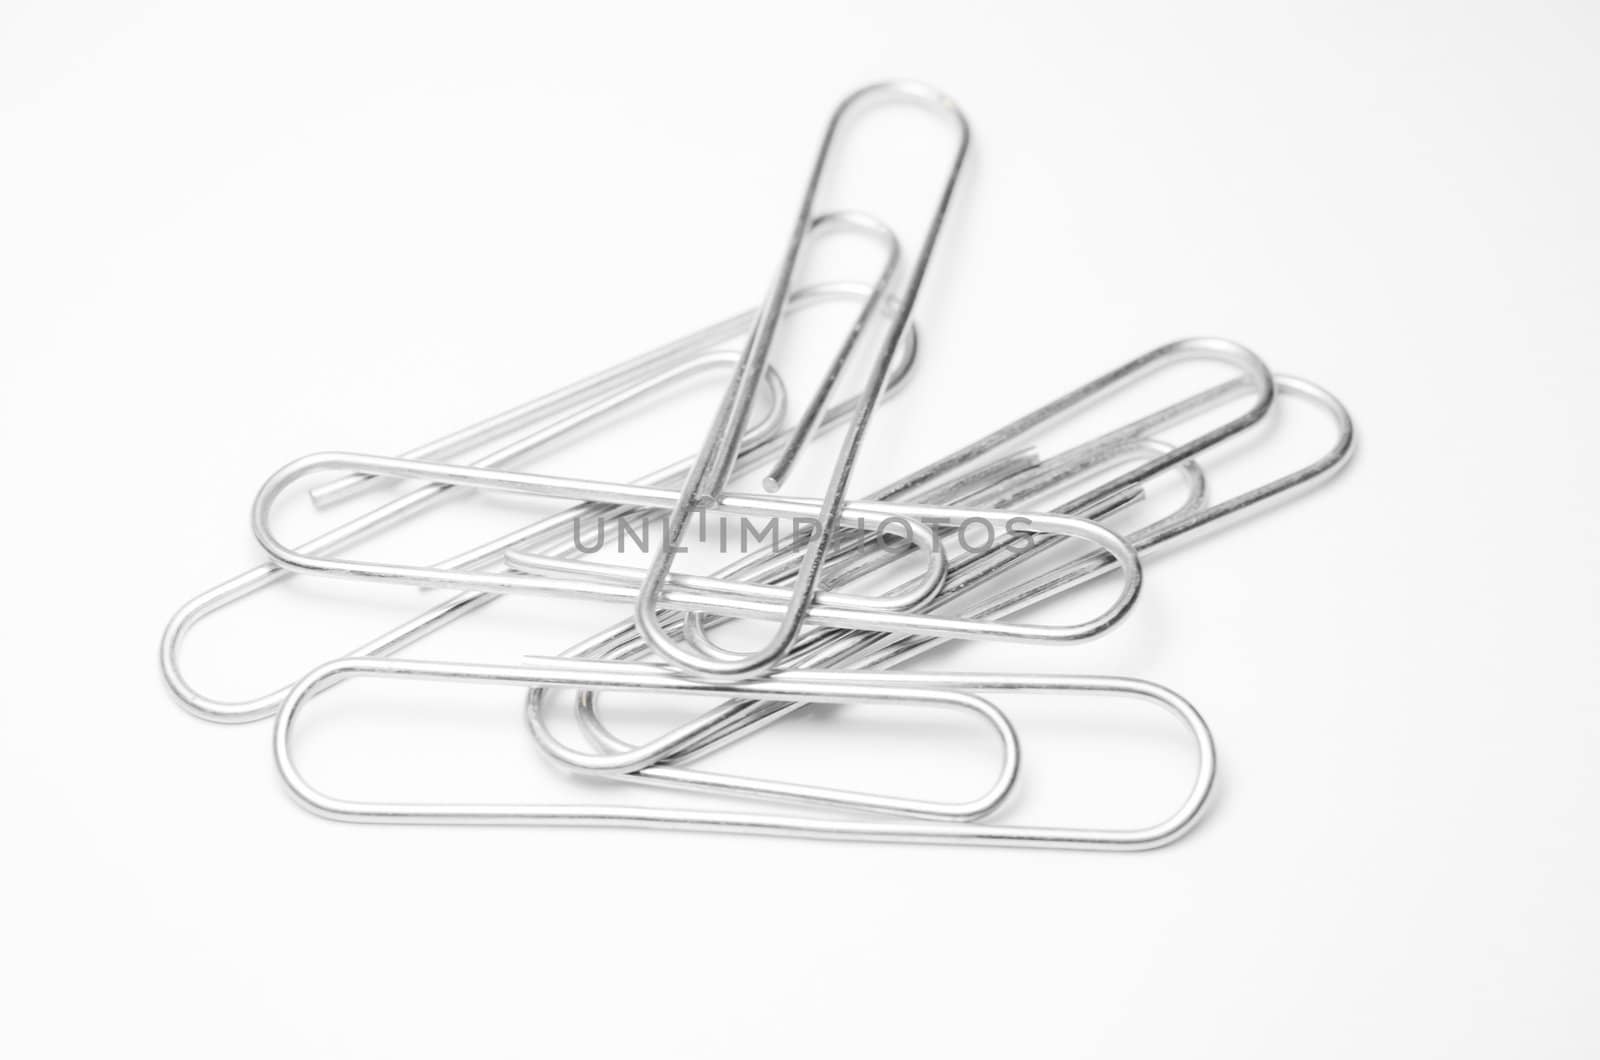 Close-up of paper clips by Rinitka